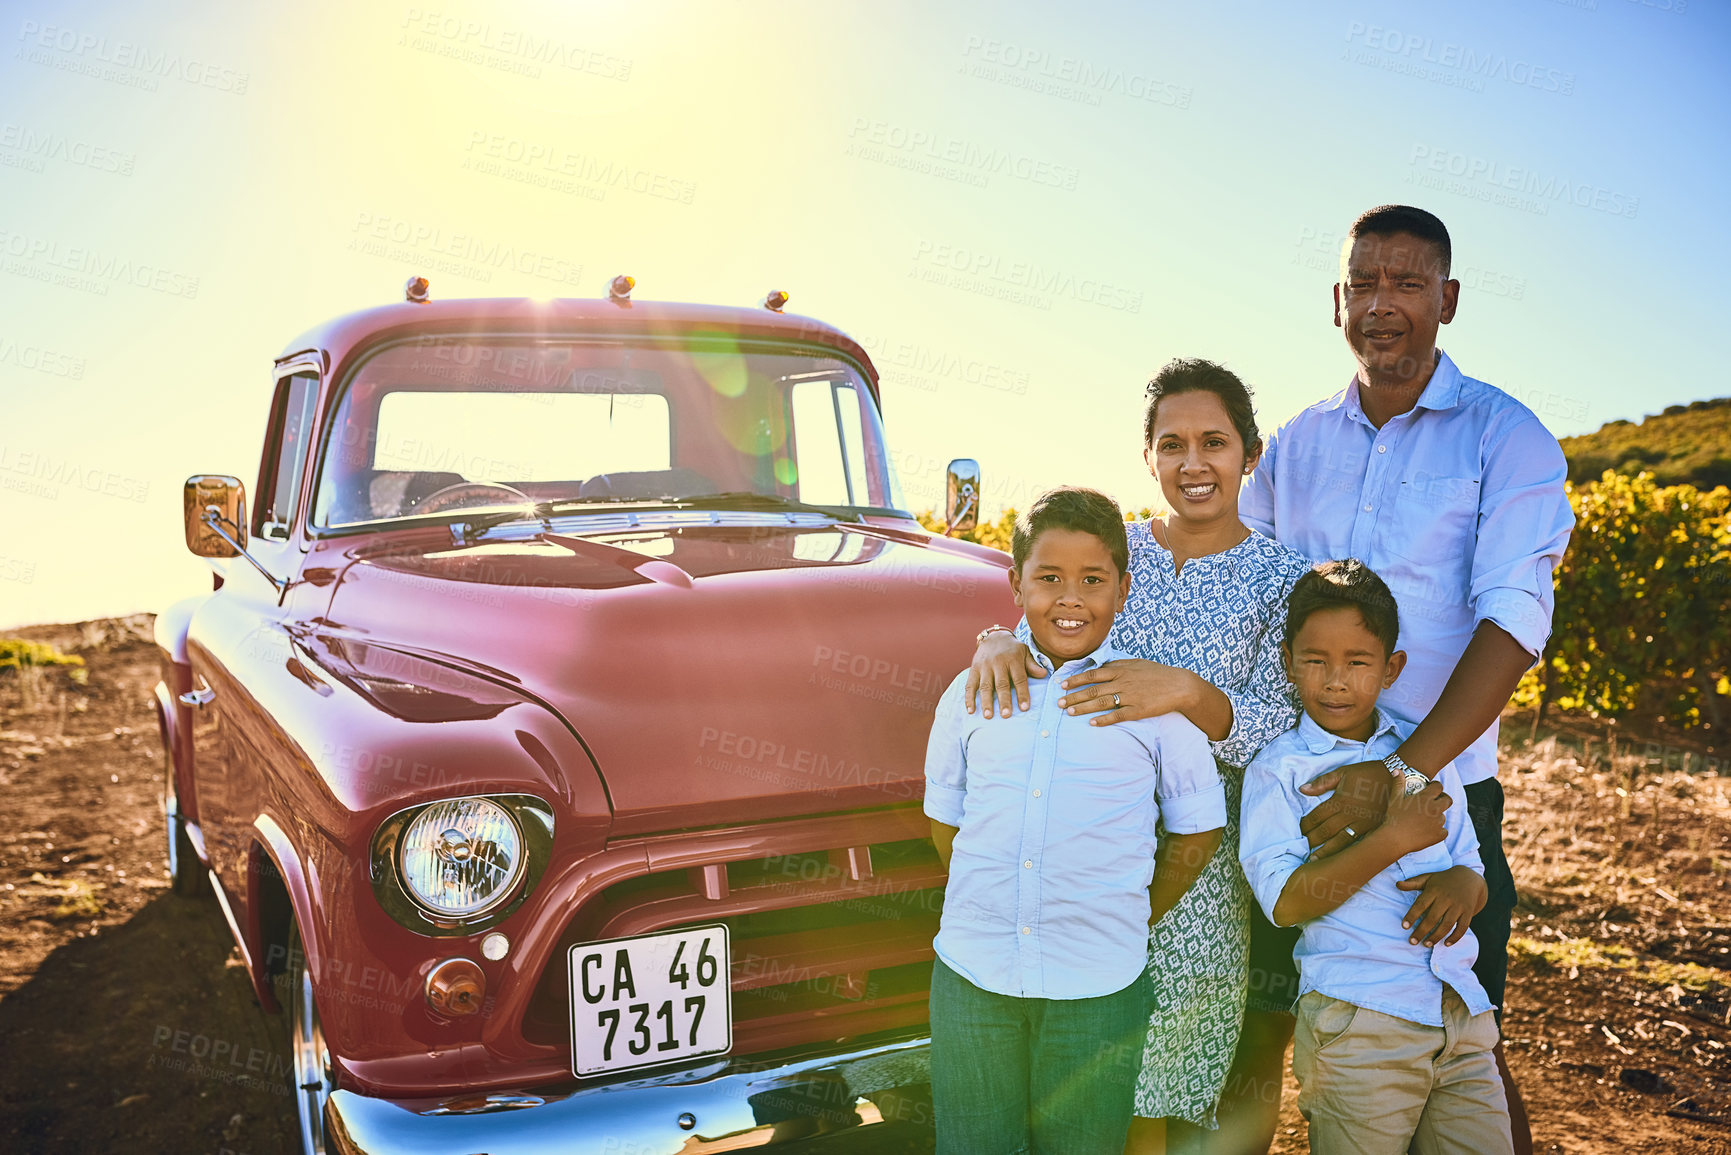 Buy stock photo Shot of a cheerful family posing for a portrait together outside next to a red pickup truck